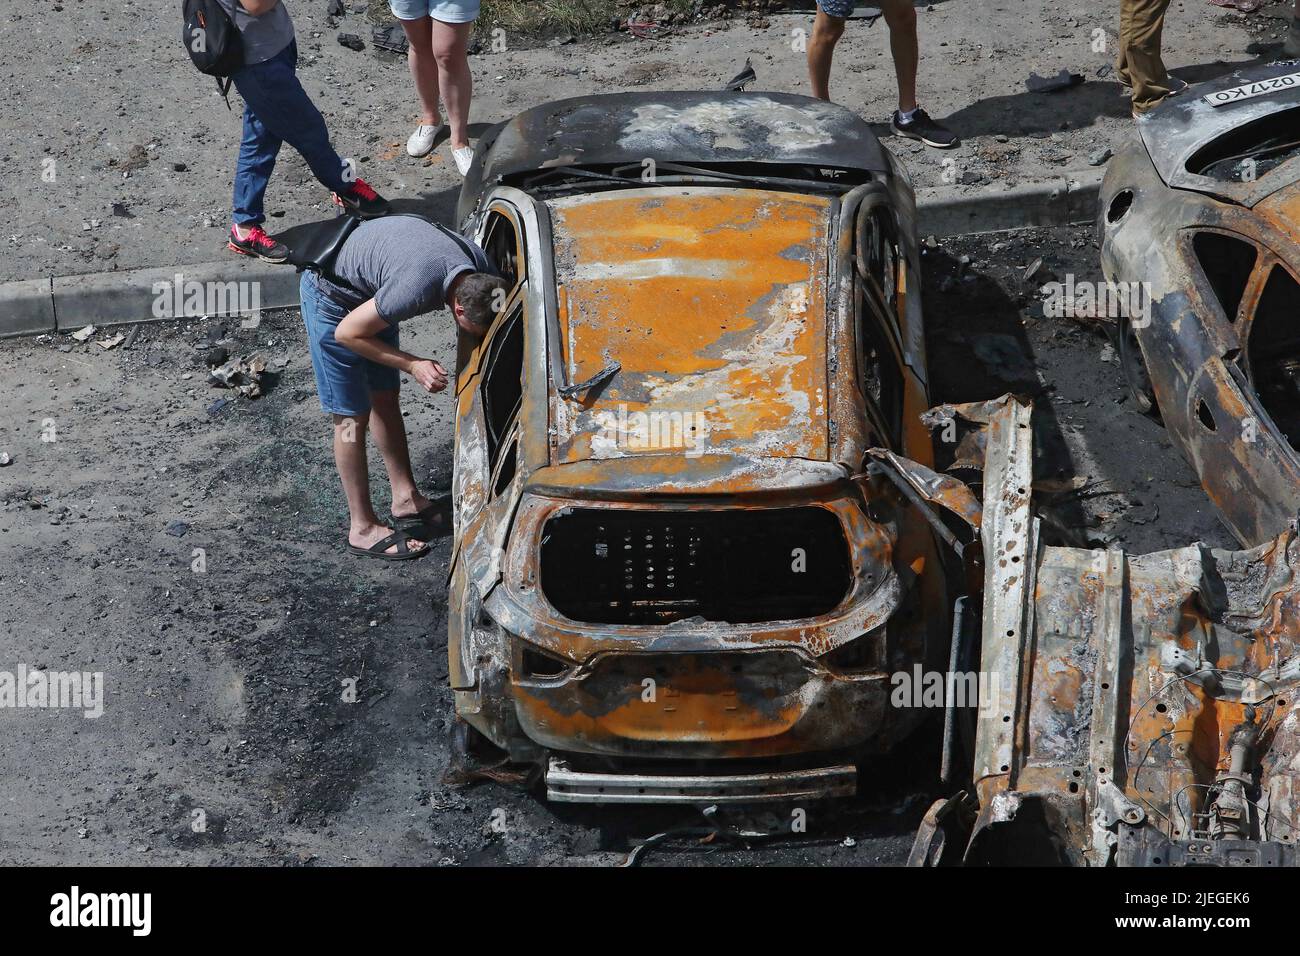 A man looks inside a burnt-out car in the yard of an apartment block after the Russian troops shelled a northern neighbourhood with a BM-30 Smerch multiple rocket launcher, Kharkiv, northeastern Ukraine, June 26, 2022. Photo by Vyacheslav Madiyevskyy/Ukrinform/ABACAPRESS.COM Stock Photo